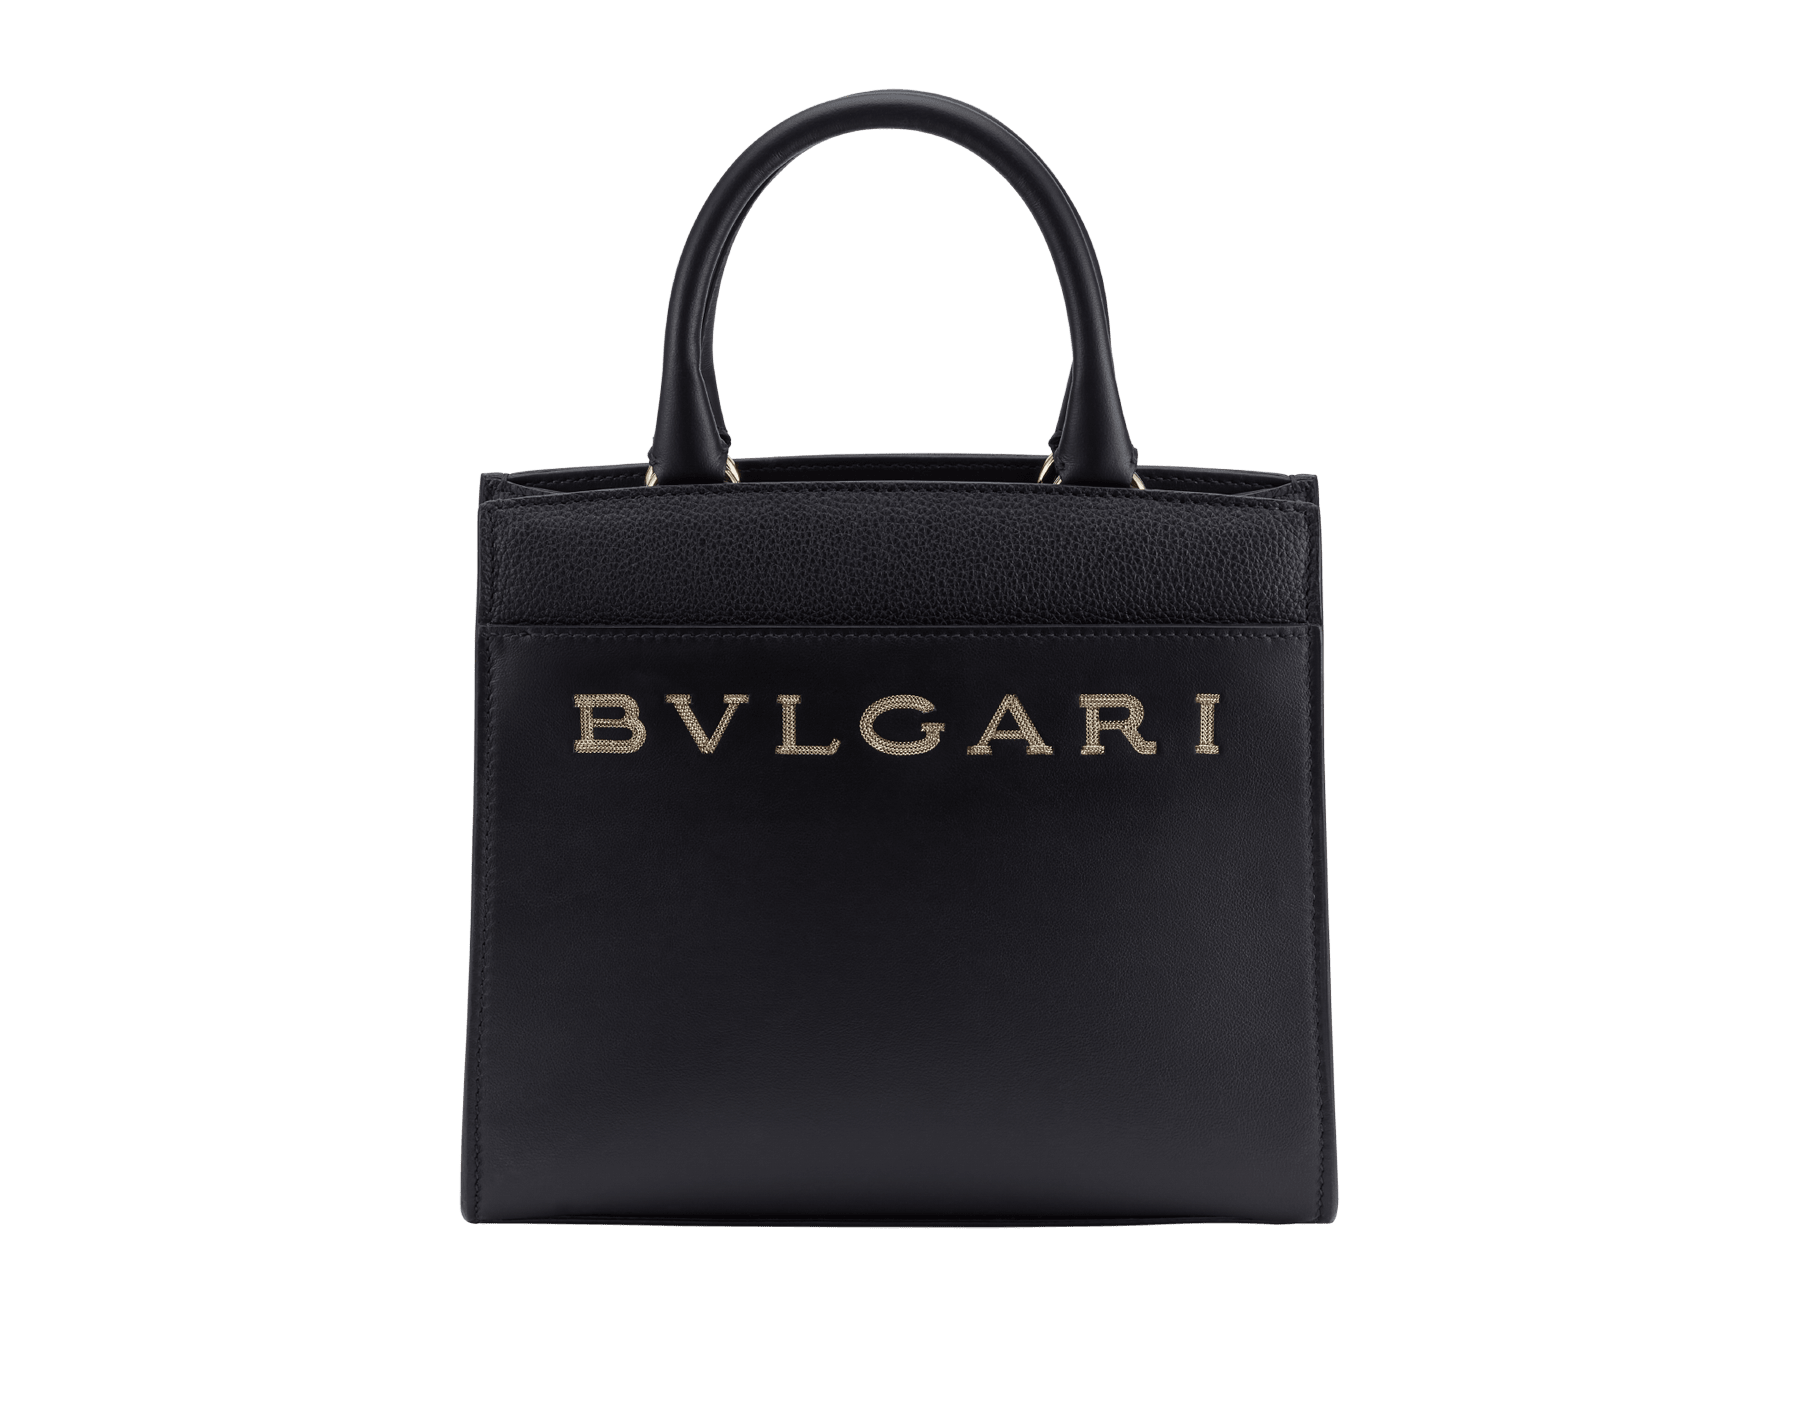 Bulgari Logo small tote bag in amaranth garnet red smooth and grained calf leather with flamingo quartz pink grosgrain lining. Iconic Bulgari logo decorative chain in light gold-plated brass. BVL-1202 image 1